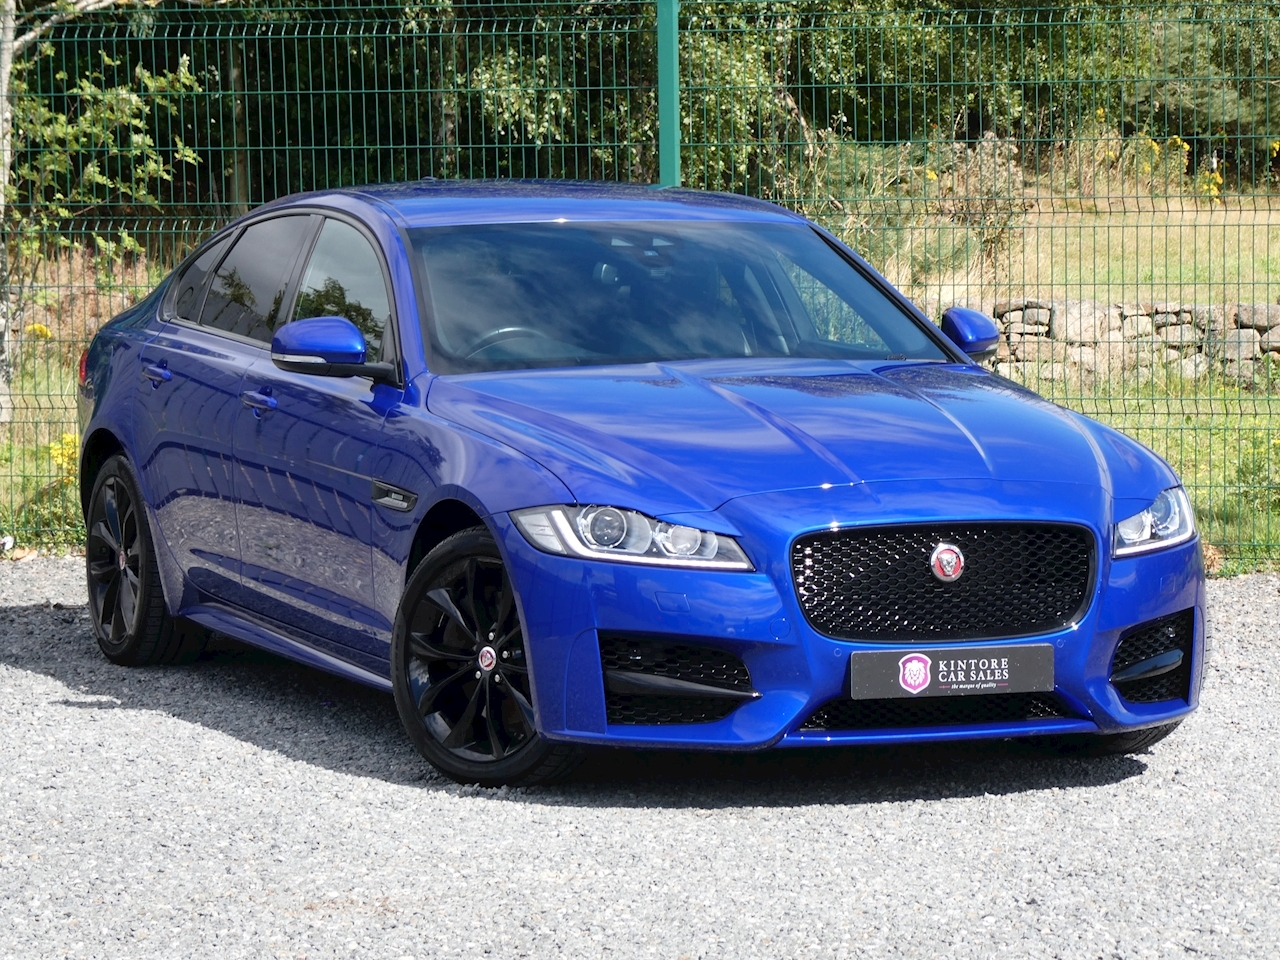 XF 2.0d R-Sport, Automatic 2.0 4dr Saloon Automatic Diesel